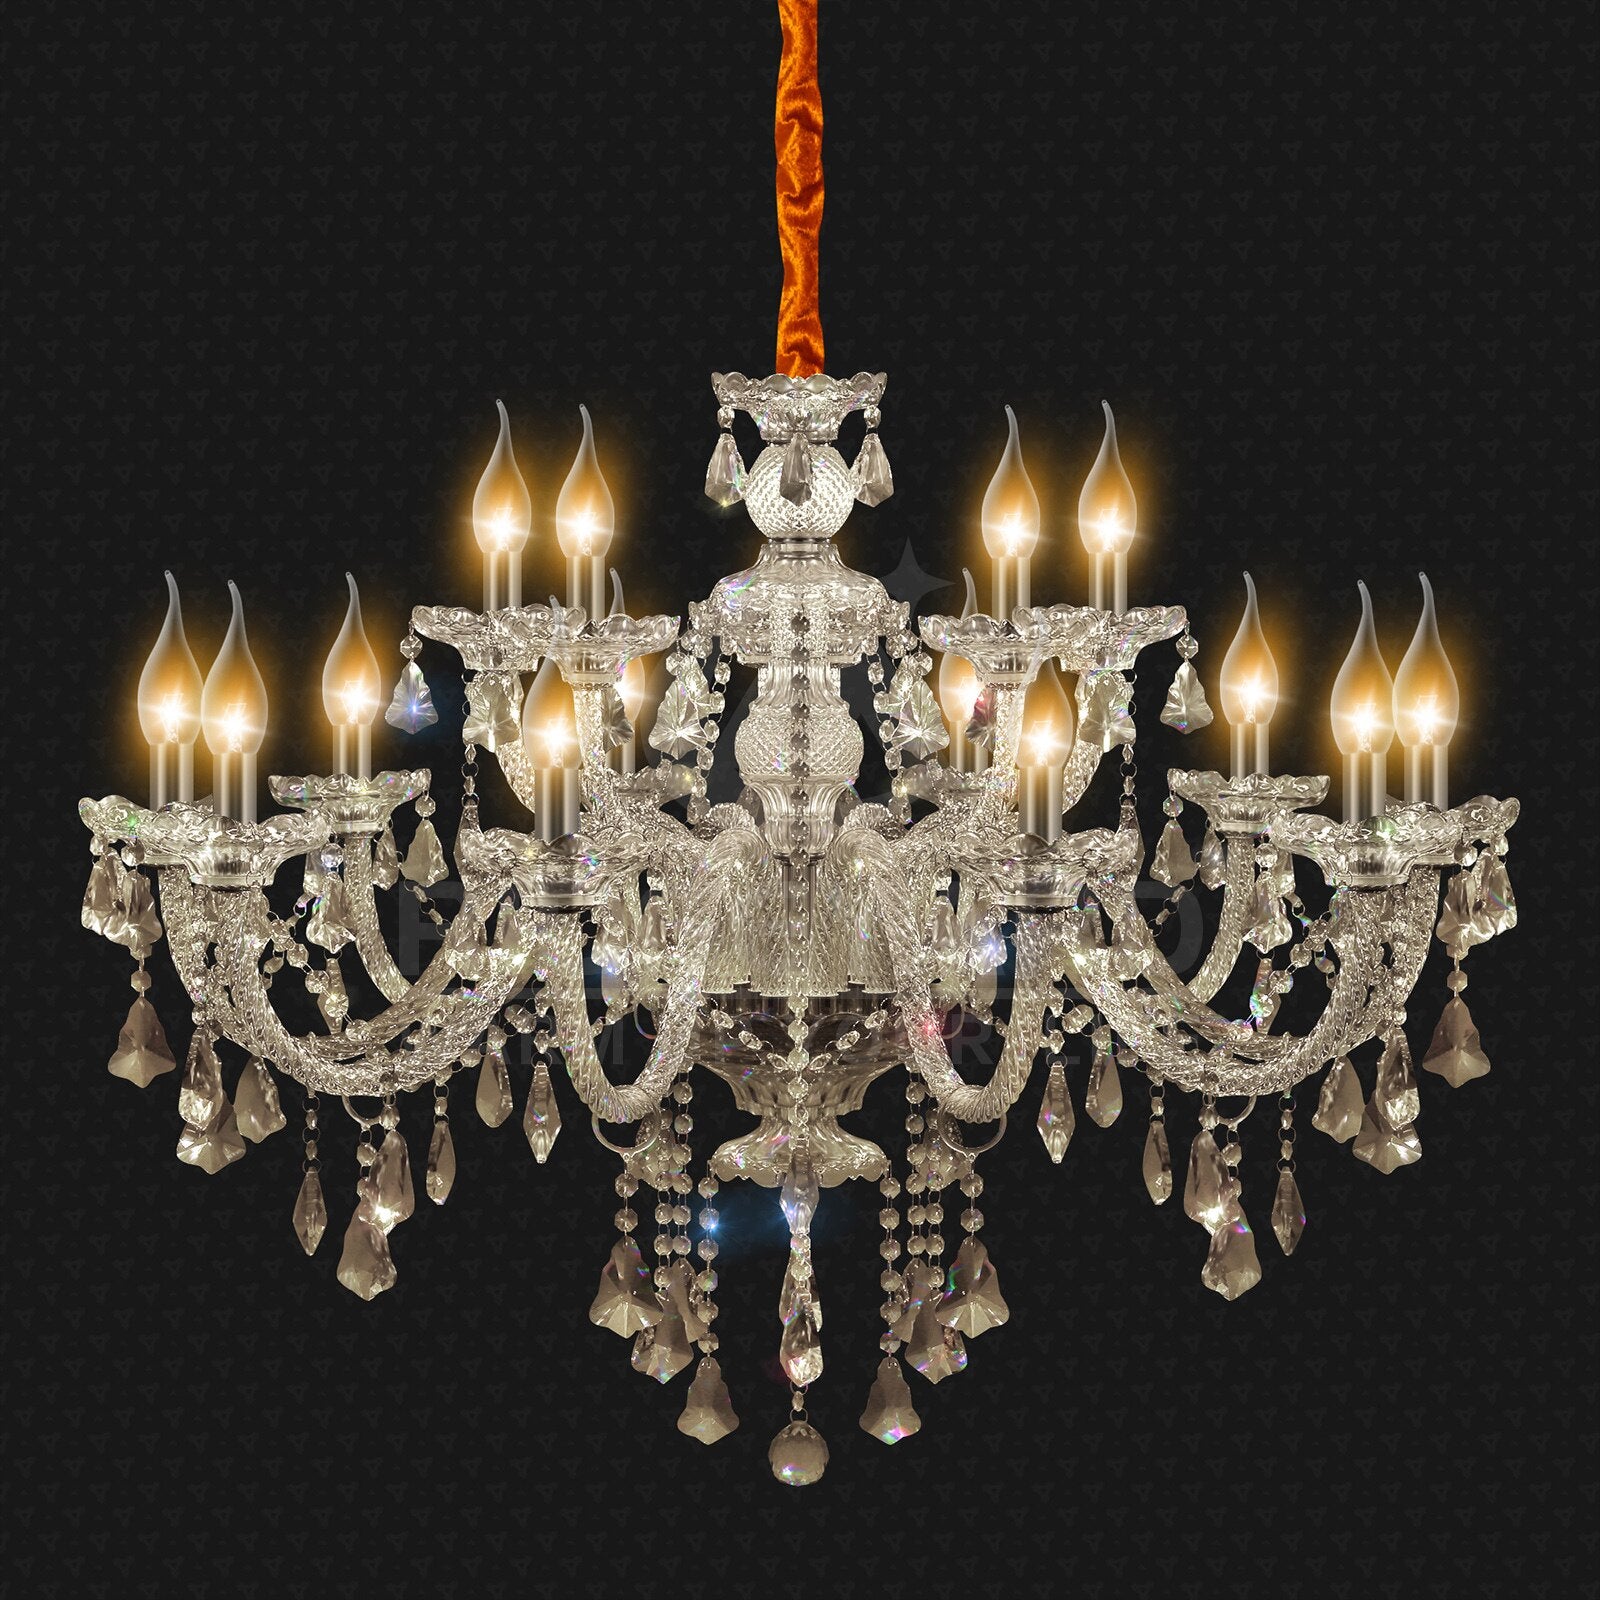 Luxurious Crystal Chandelier Lights 15 Arms K9 Crystal Ceiling Pendant E12 Lamps For Home Living Room Hotel Lobby